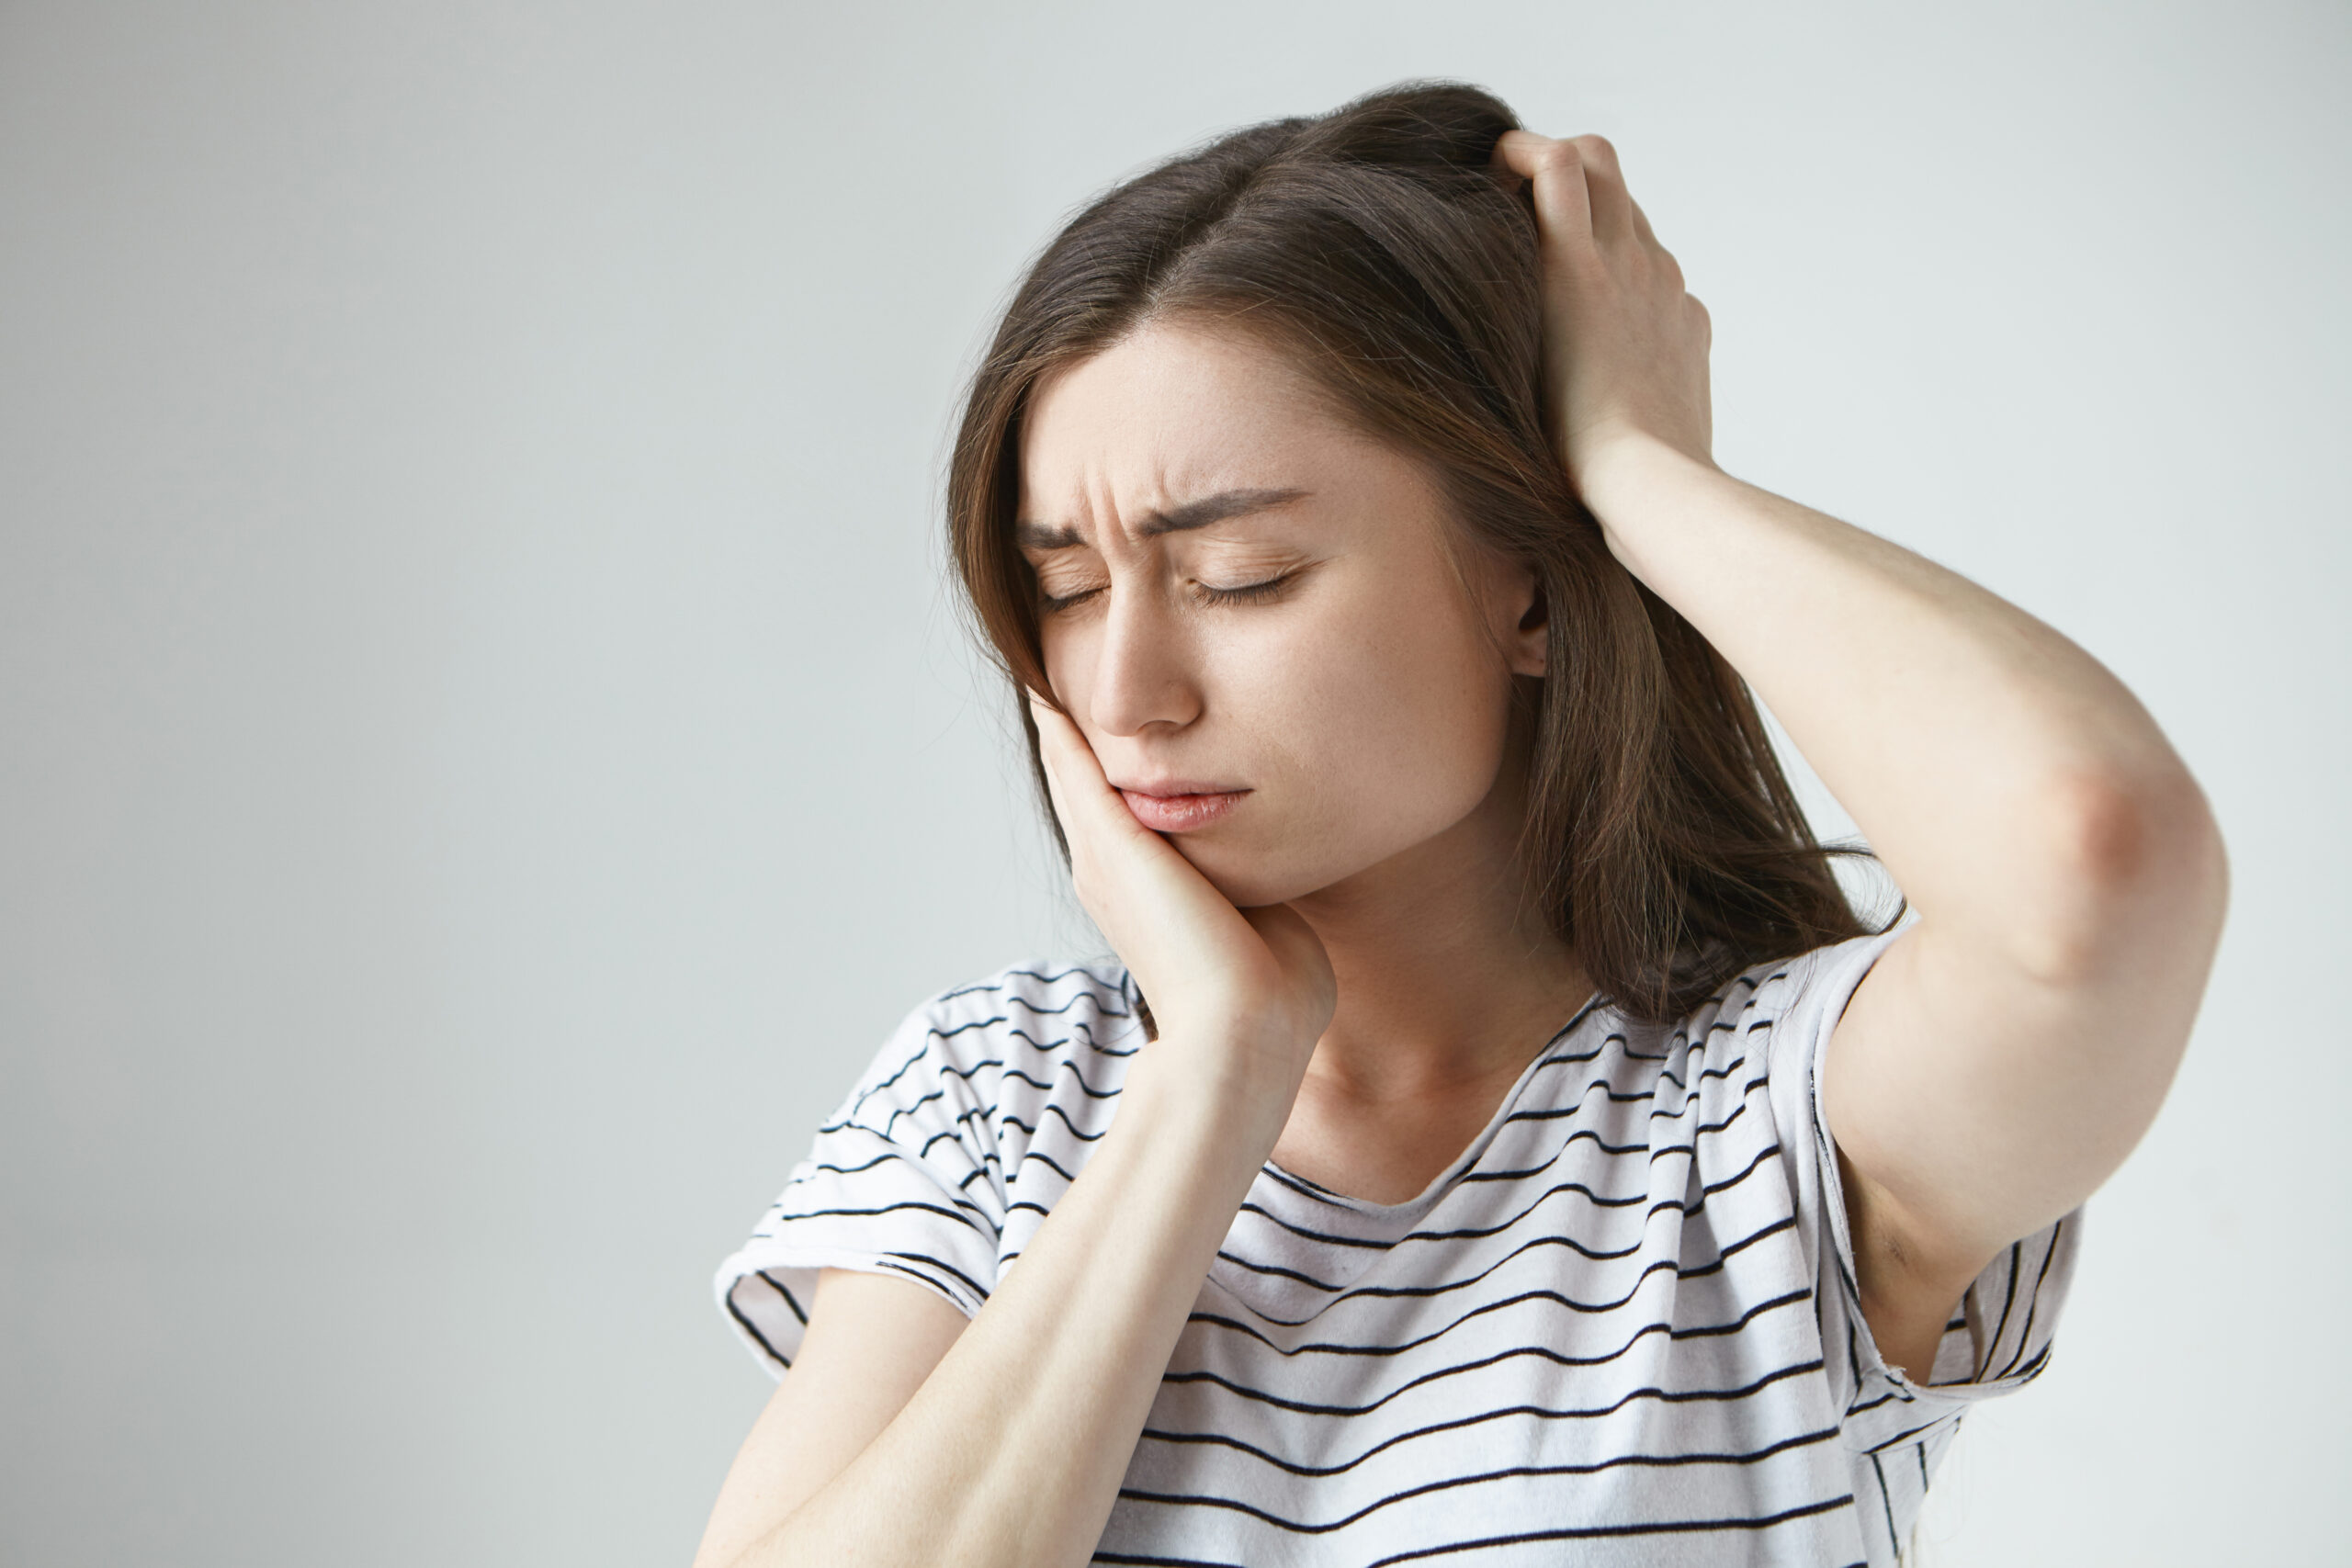 6 Simple and Effective TMJ Self-Care Tips for a Pain-Free Jaw